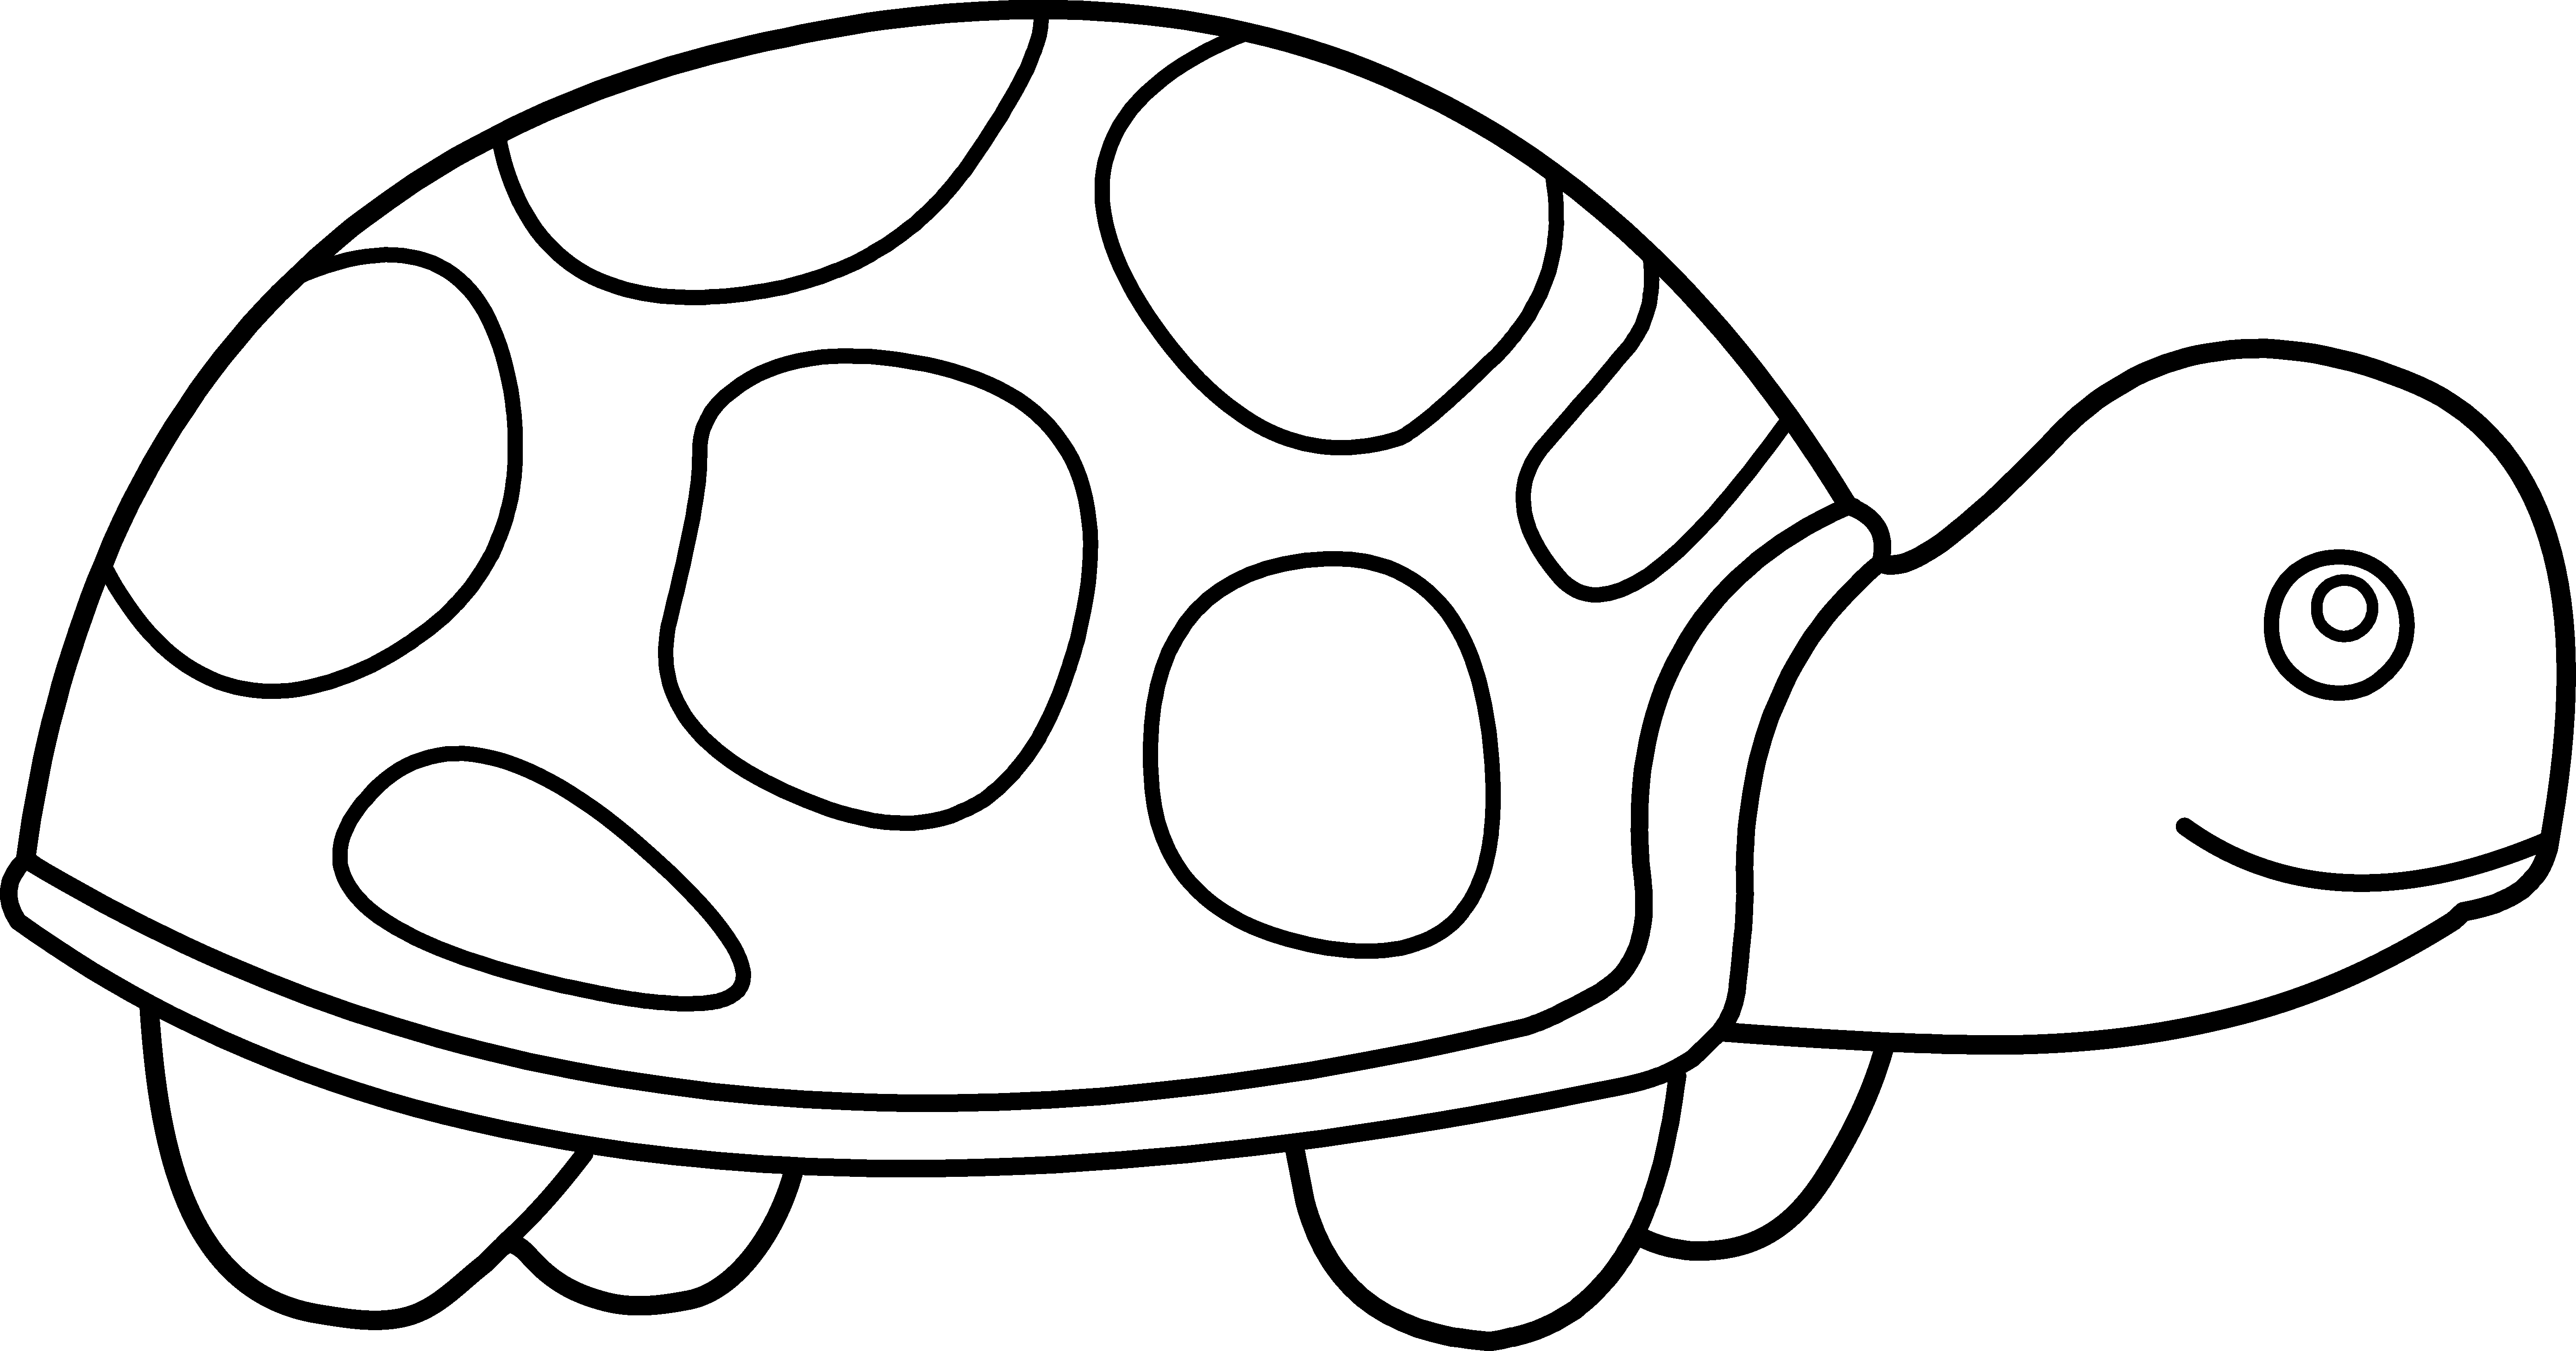 Baby Clipart Black And White - Clip Art Of A Turtle (5563x2917)